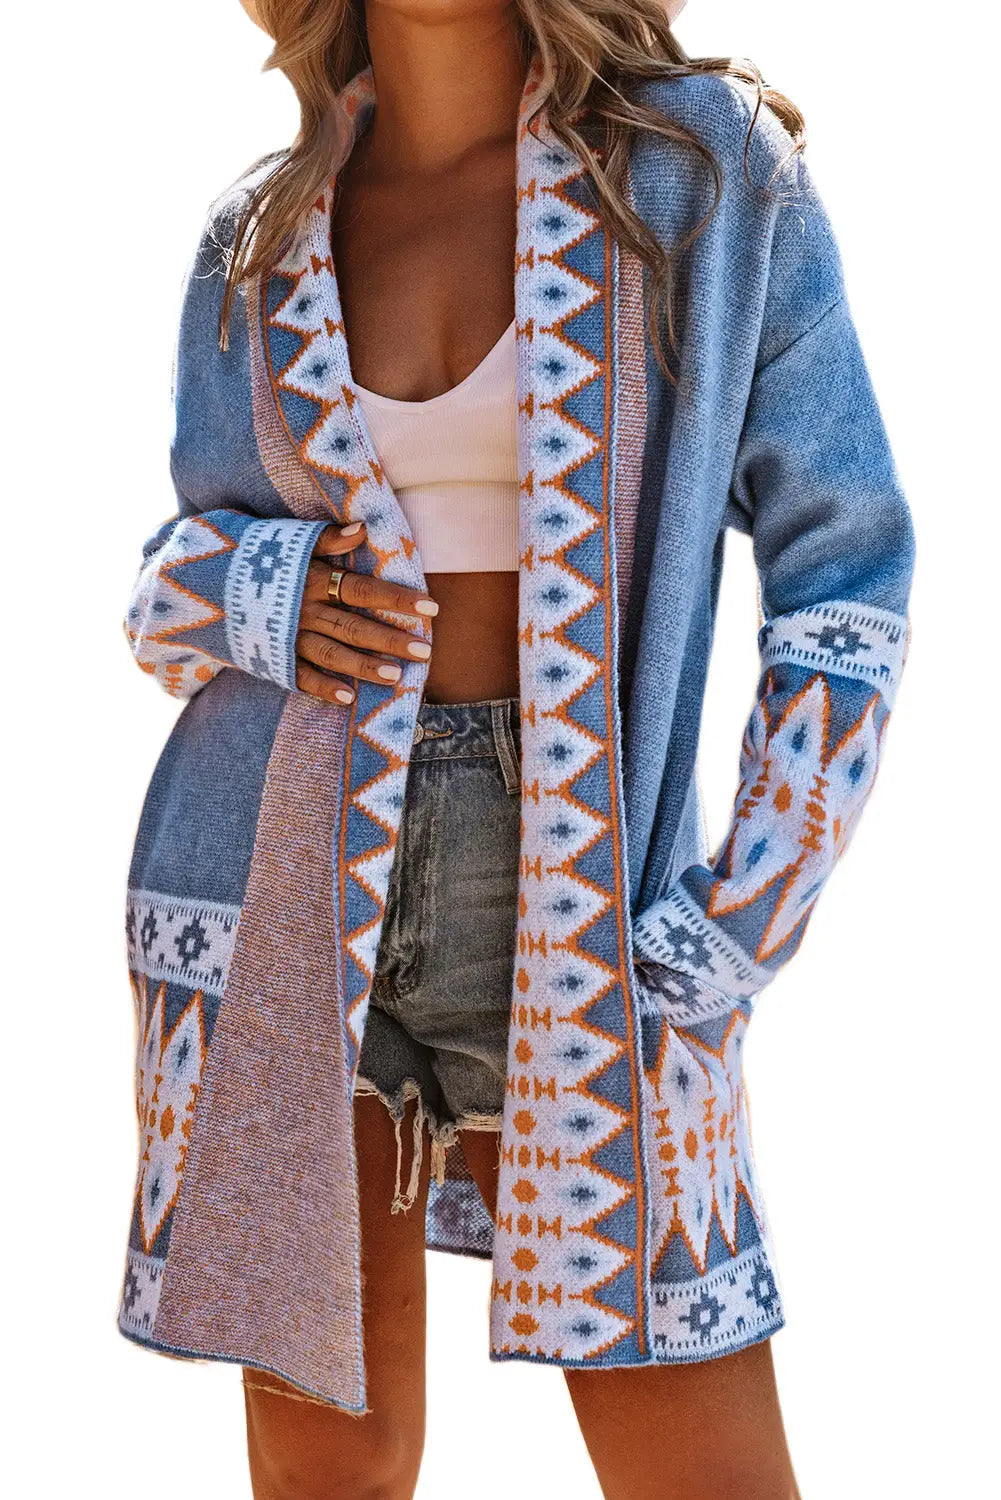 Aztec print open front knitted cardigan - sweaters & cardigans